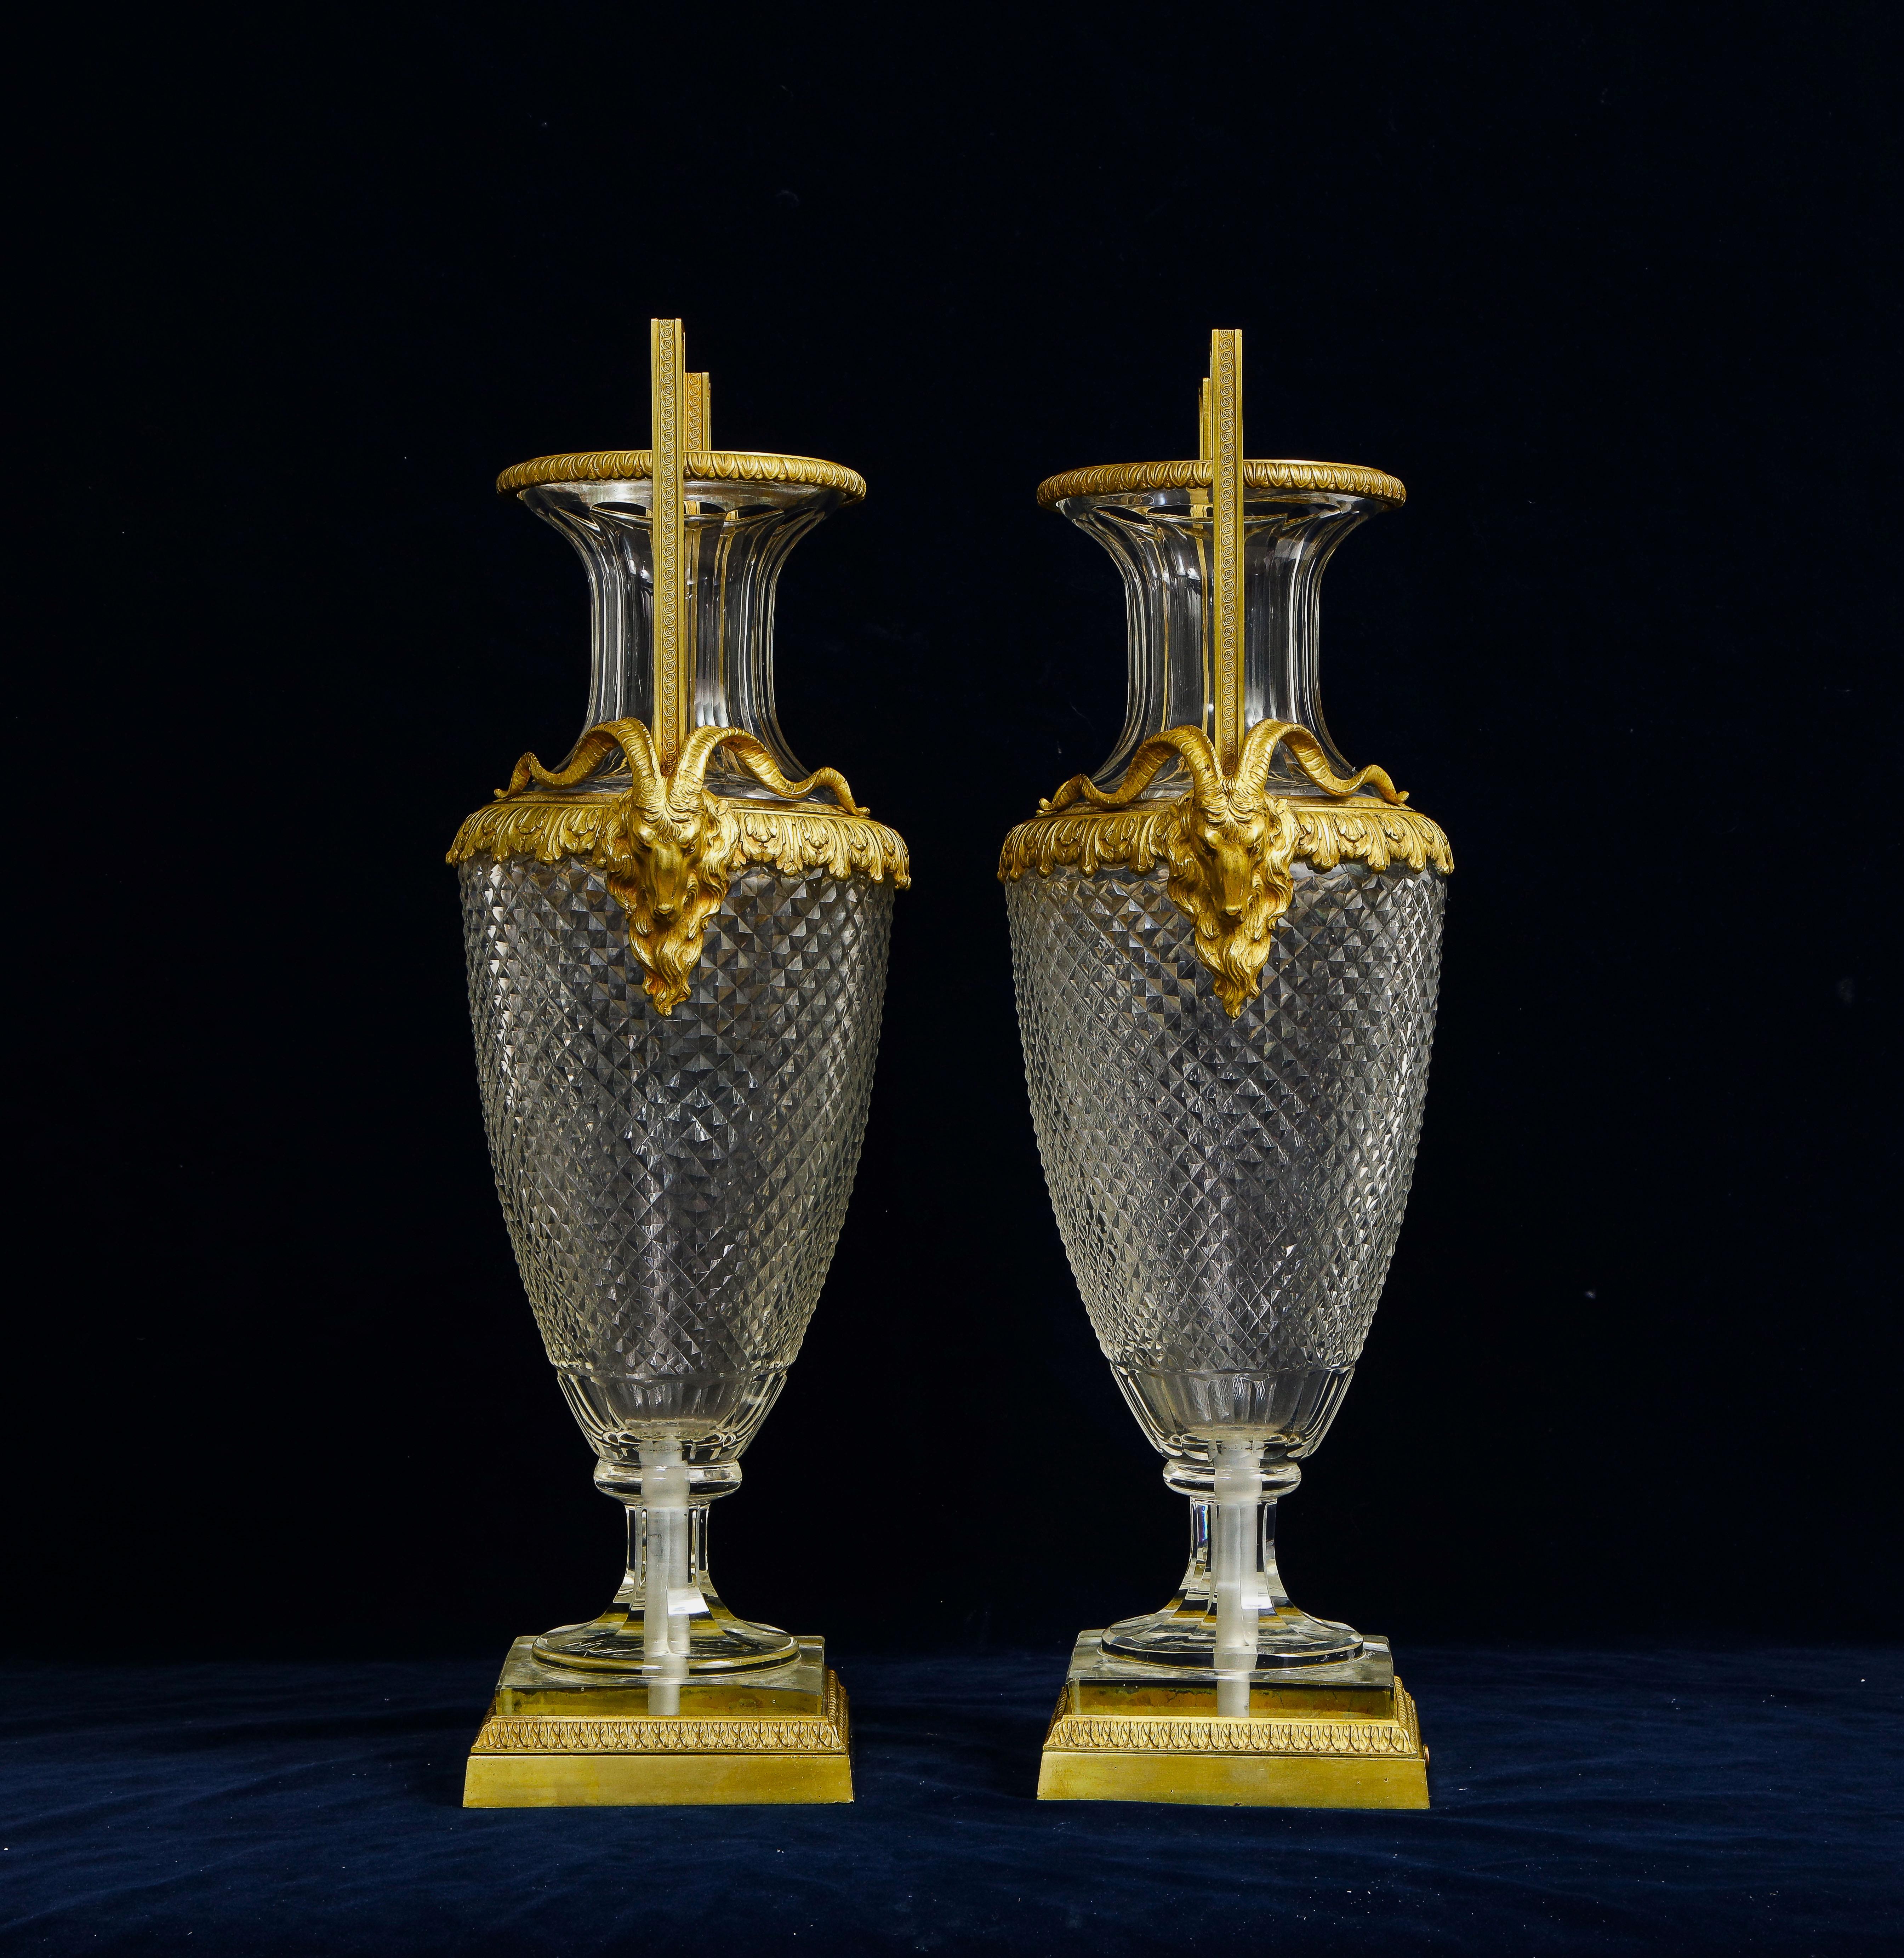 Pair of 19th Century French Dore Bronze Mounted Crystal Vases Attb to Baccarat For Sale 1